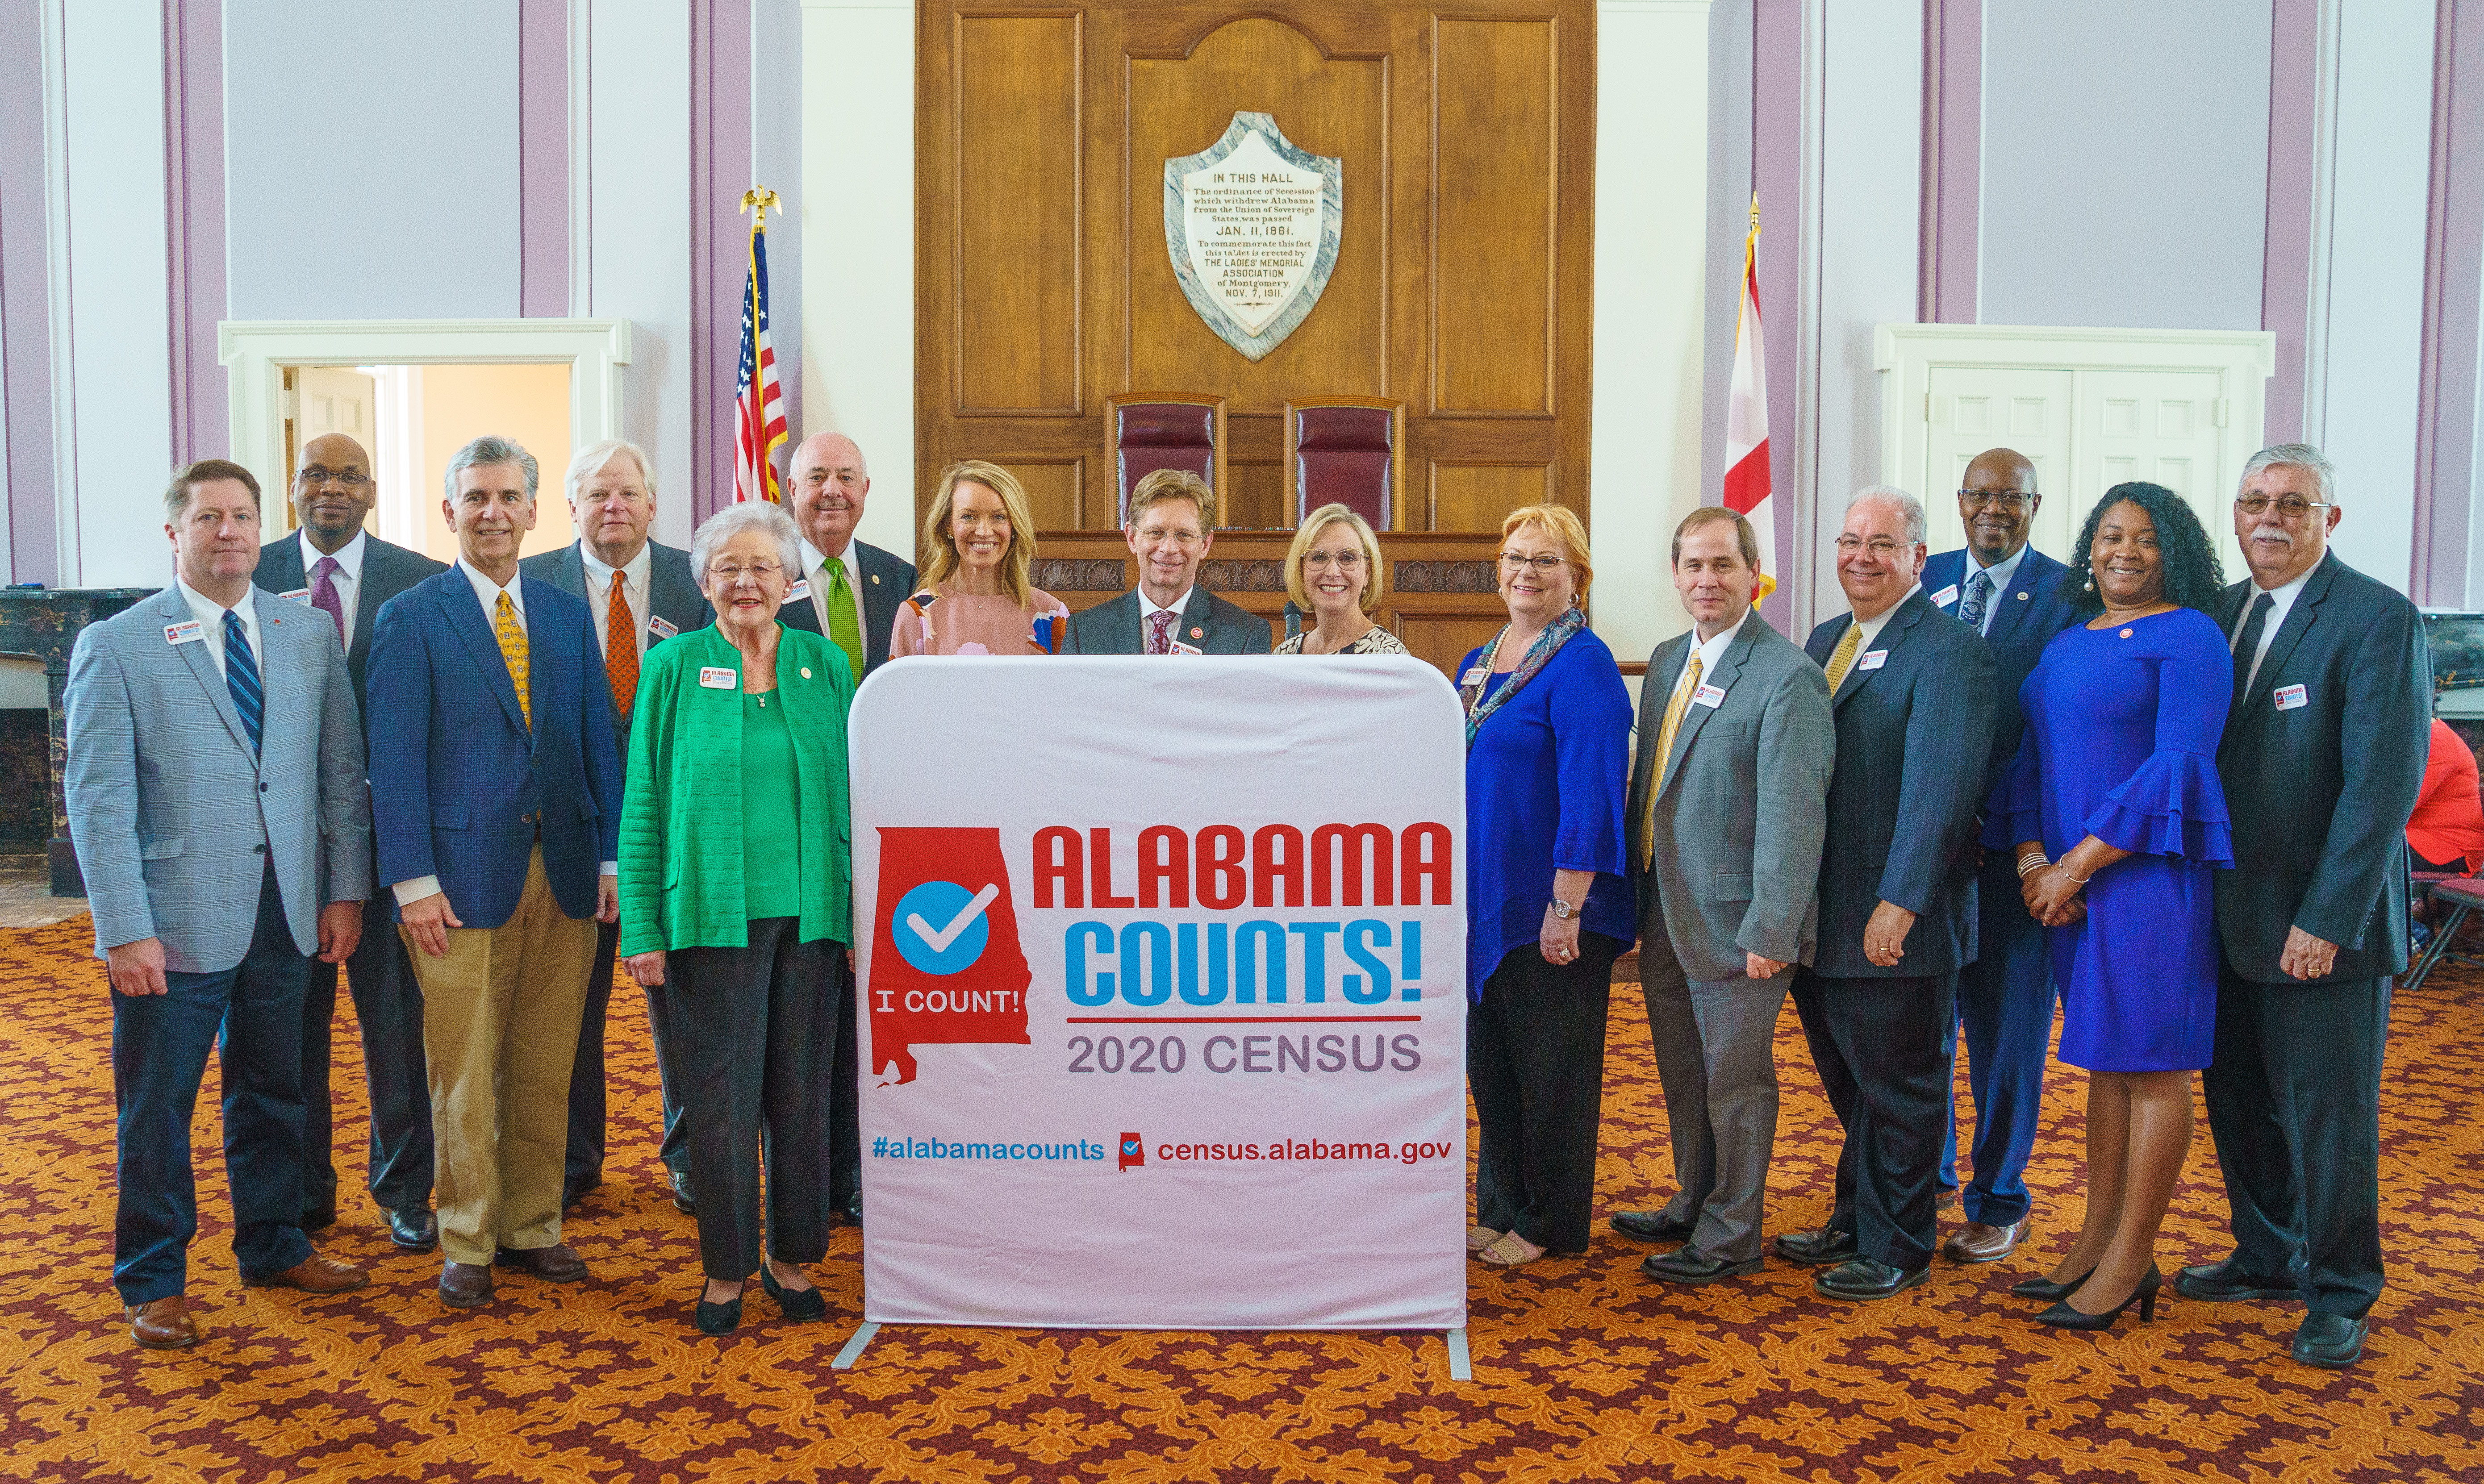 Governor Kay Ivey and the Alabama Counts Executive Committee